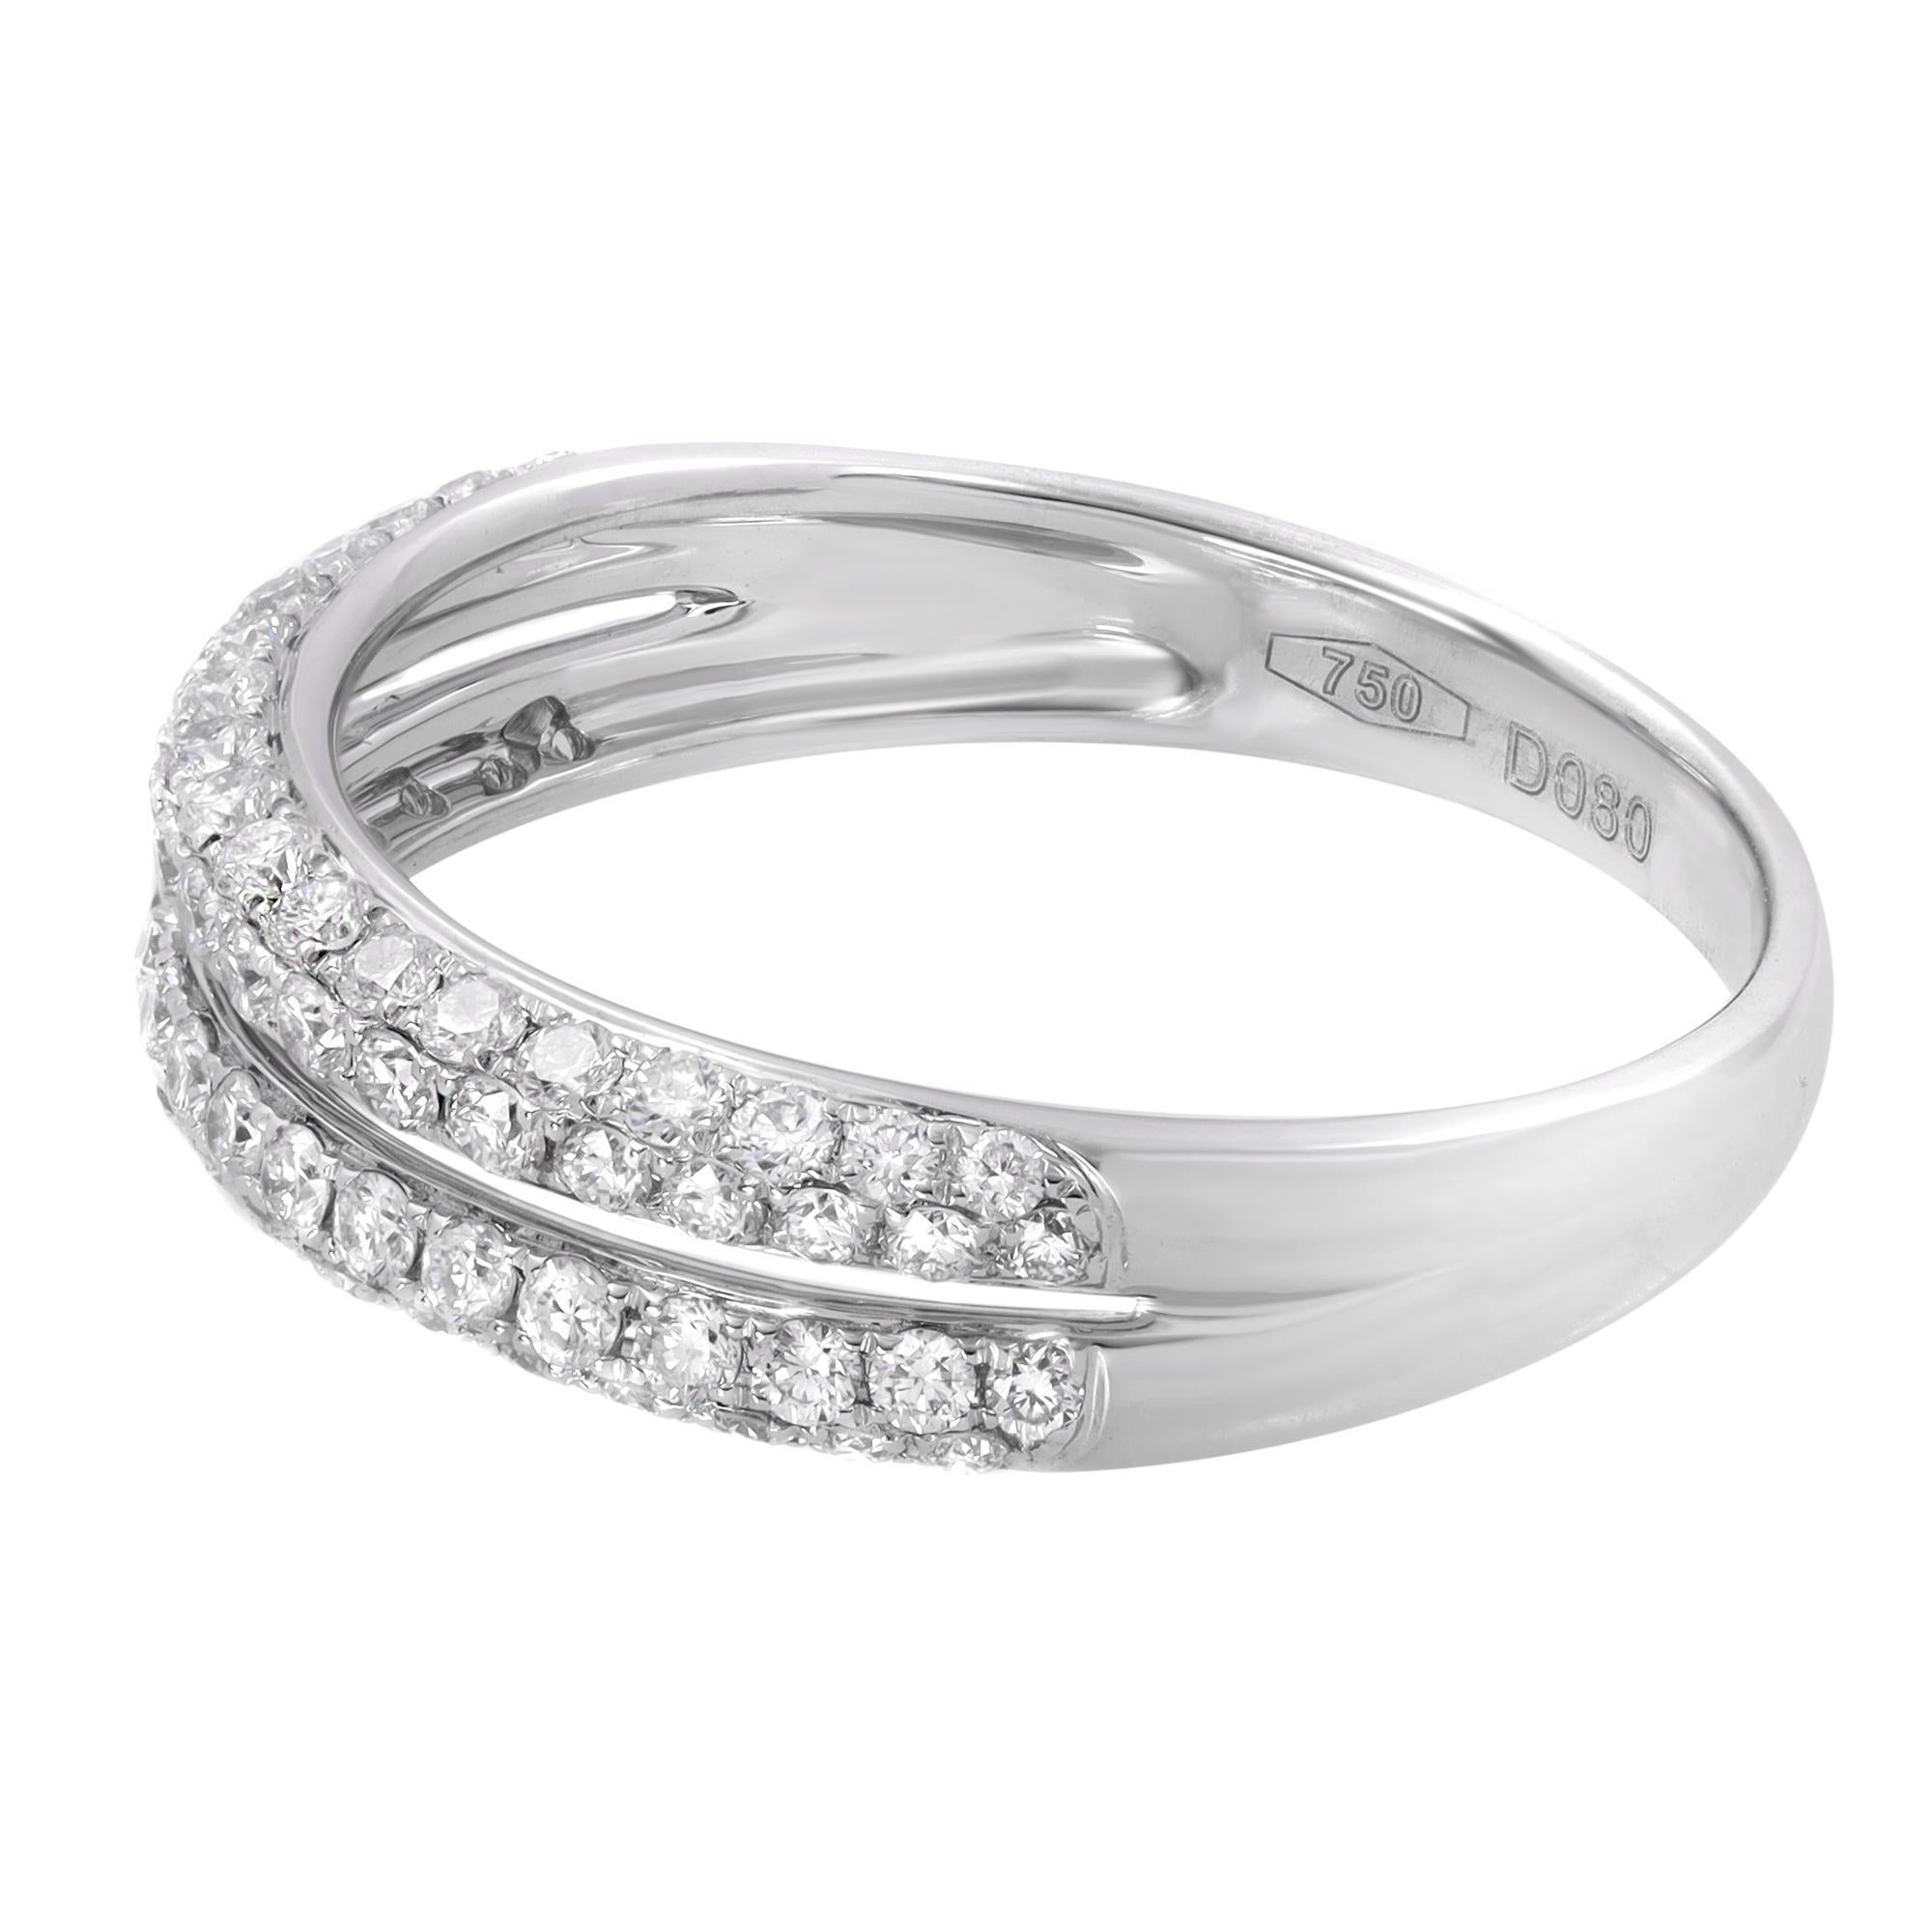 This 18k White Gold Pave Natural Diamond Ring features three-row Sparkling Diamonds. Beautifly set with  0.8 ct T.W. The Diamond  Color and Clarity G-H / VS-SI. The band width is 5.0mm. The white gold band design with diamonds promises an elegant